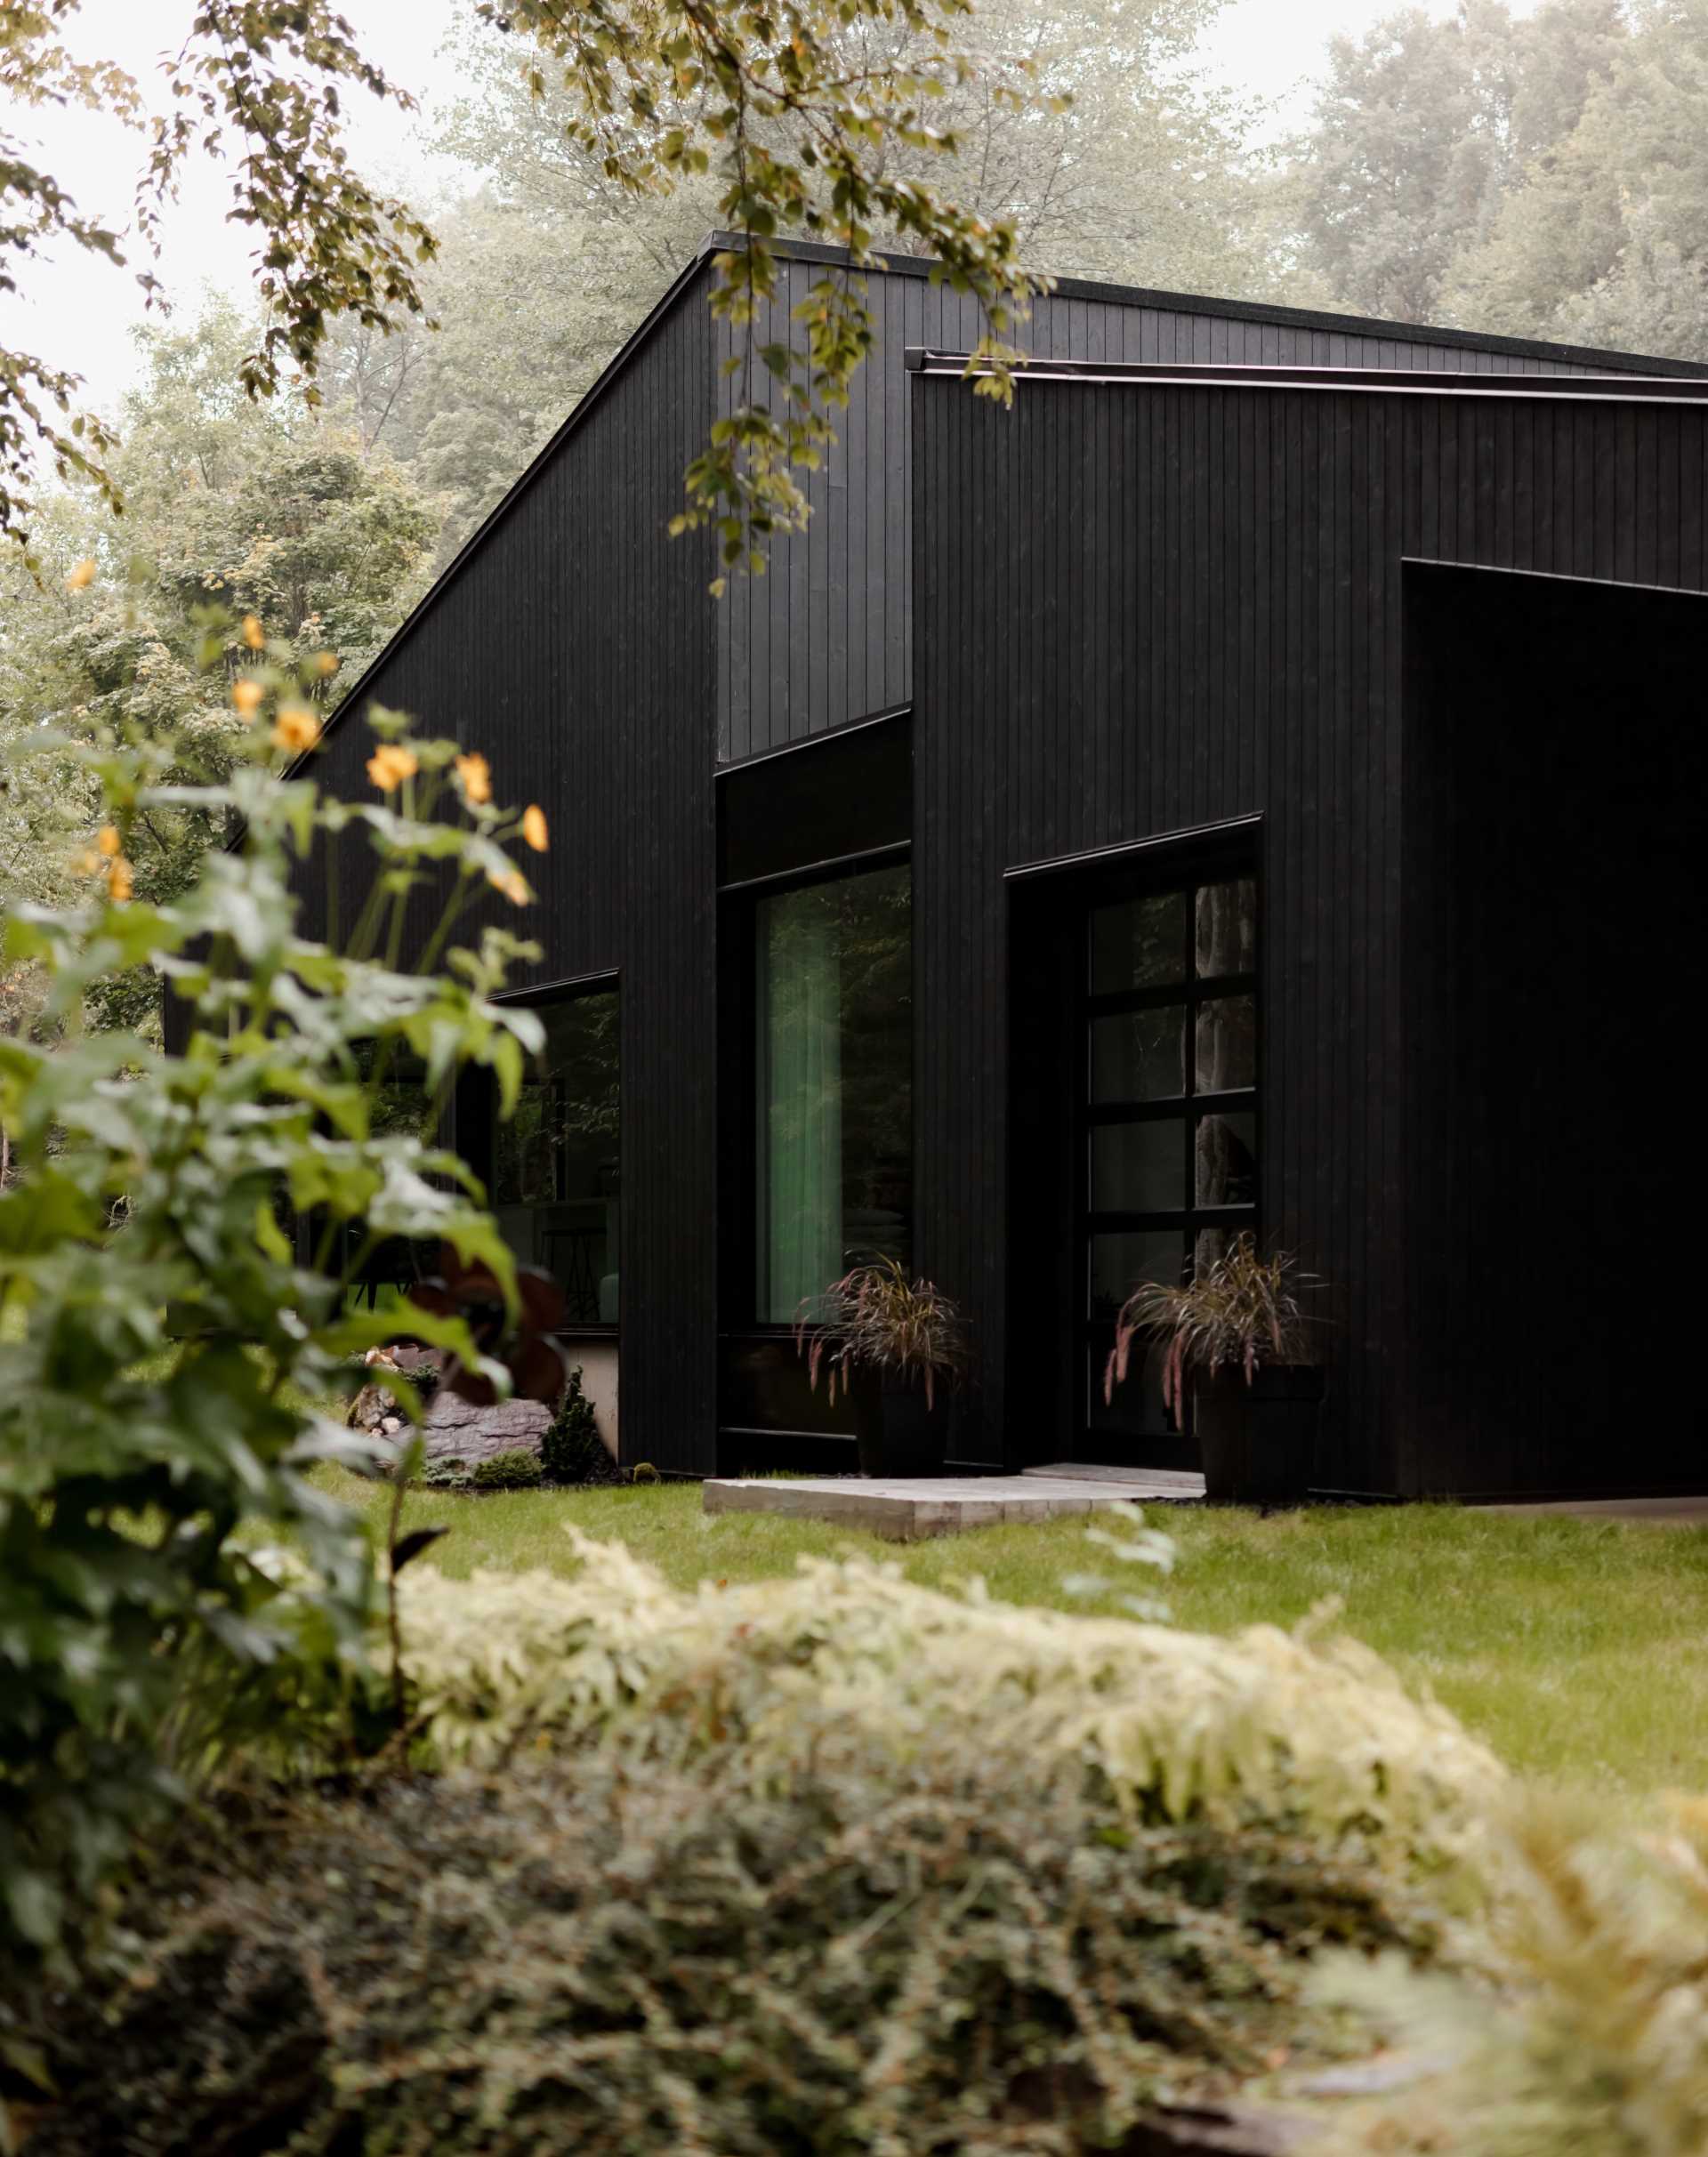 This modern home has a black wood exterior, with black window frames providing consistency to the design.